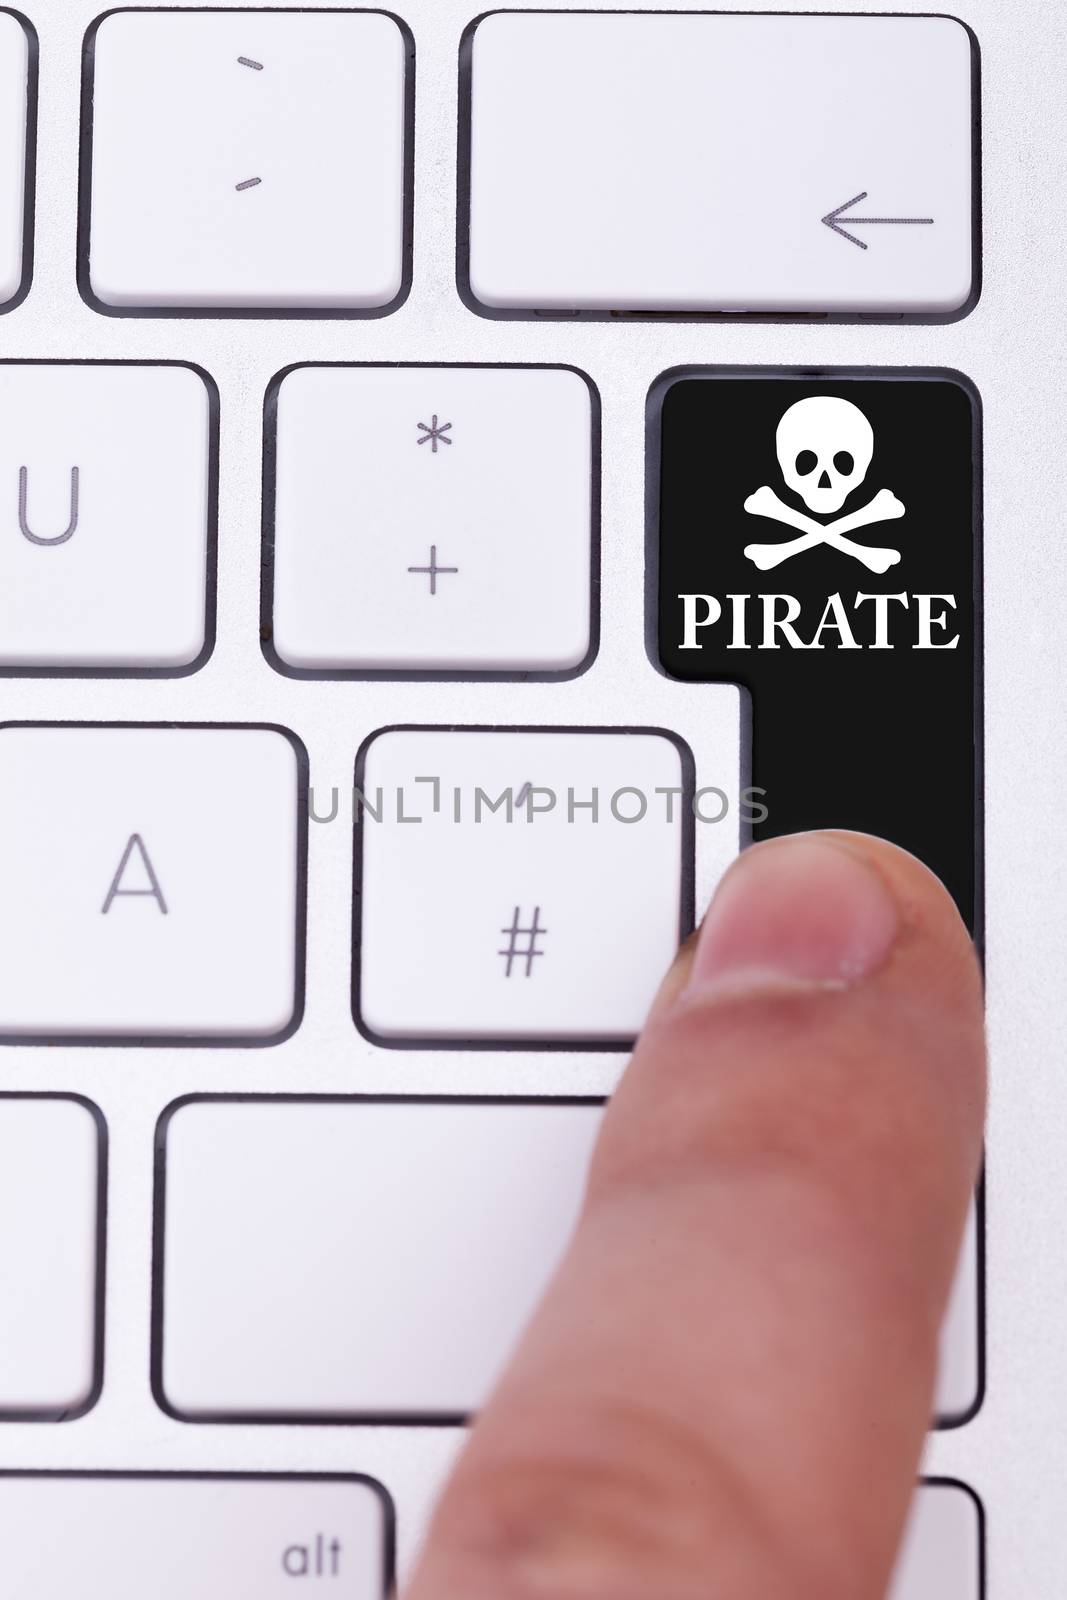 Finger pressing the pirate button and skull on keyboard. Illegall data transfer